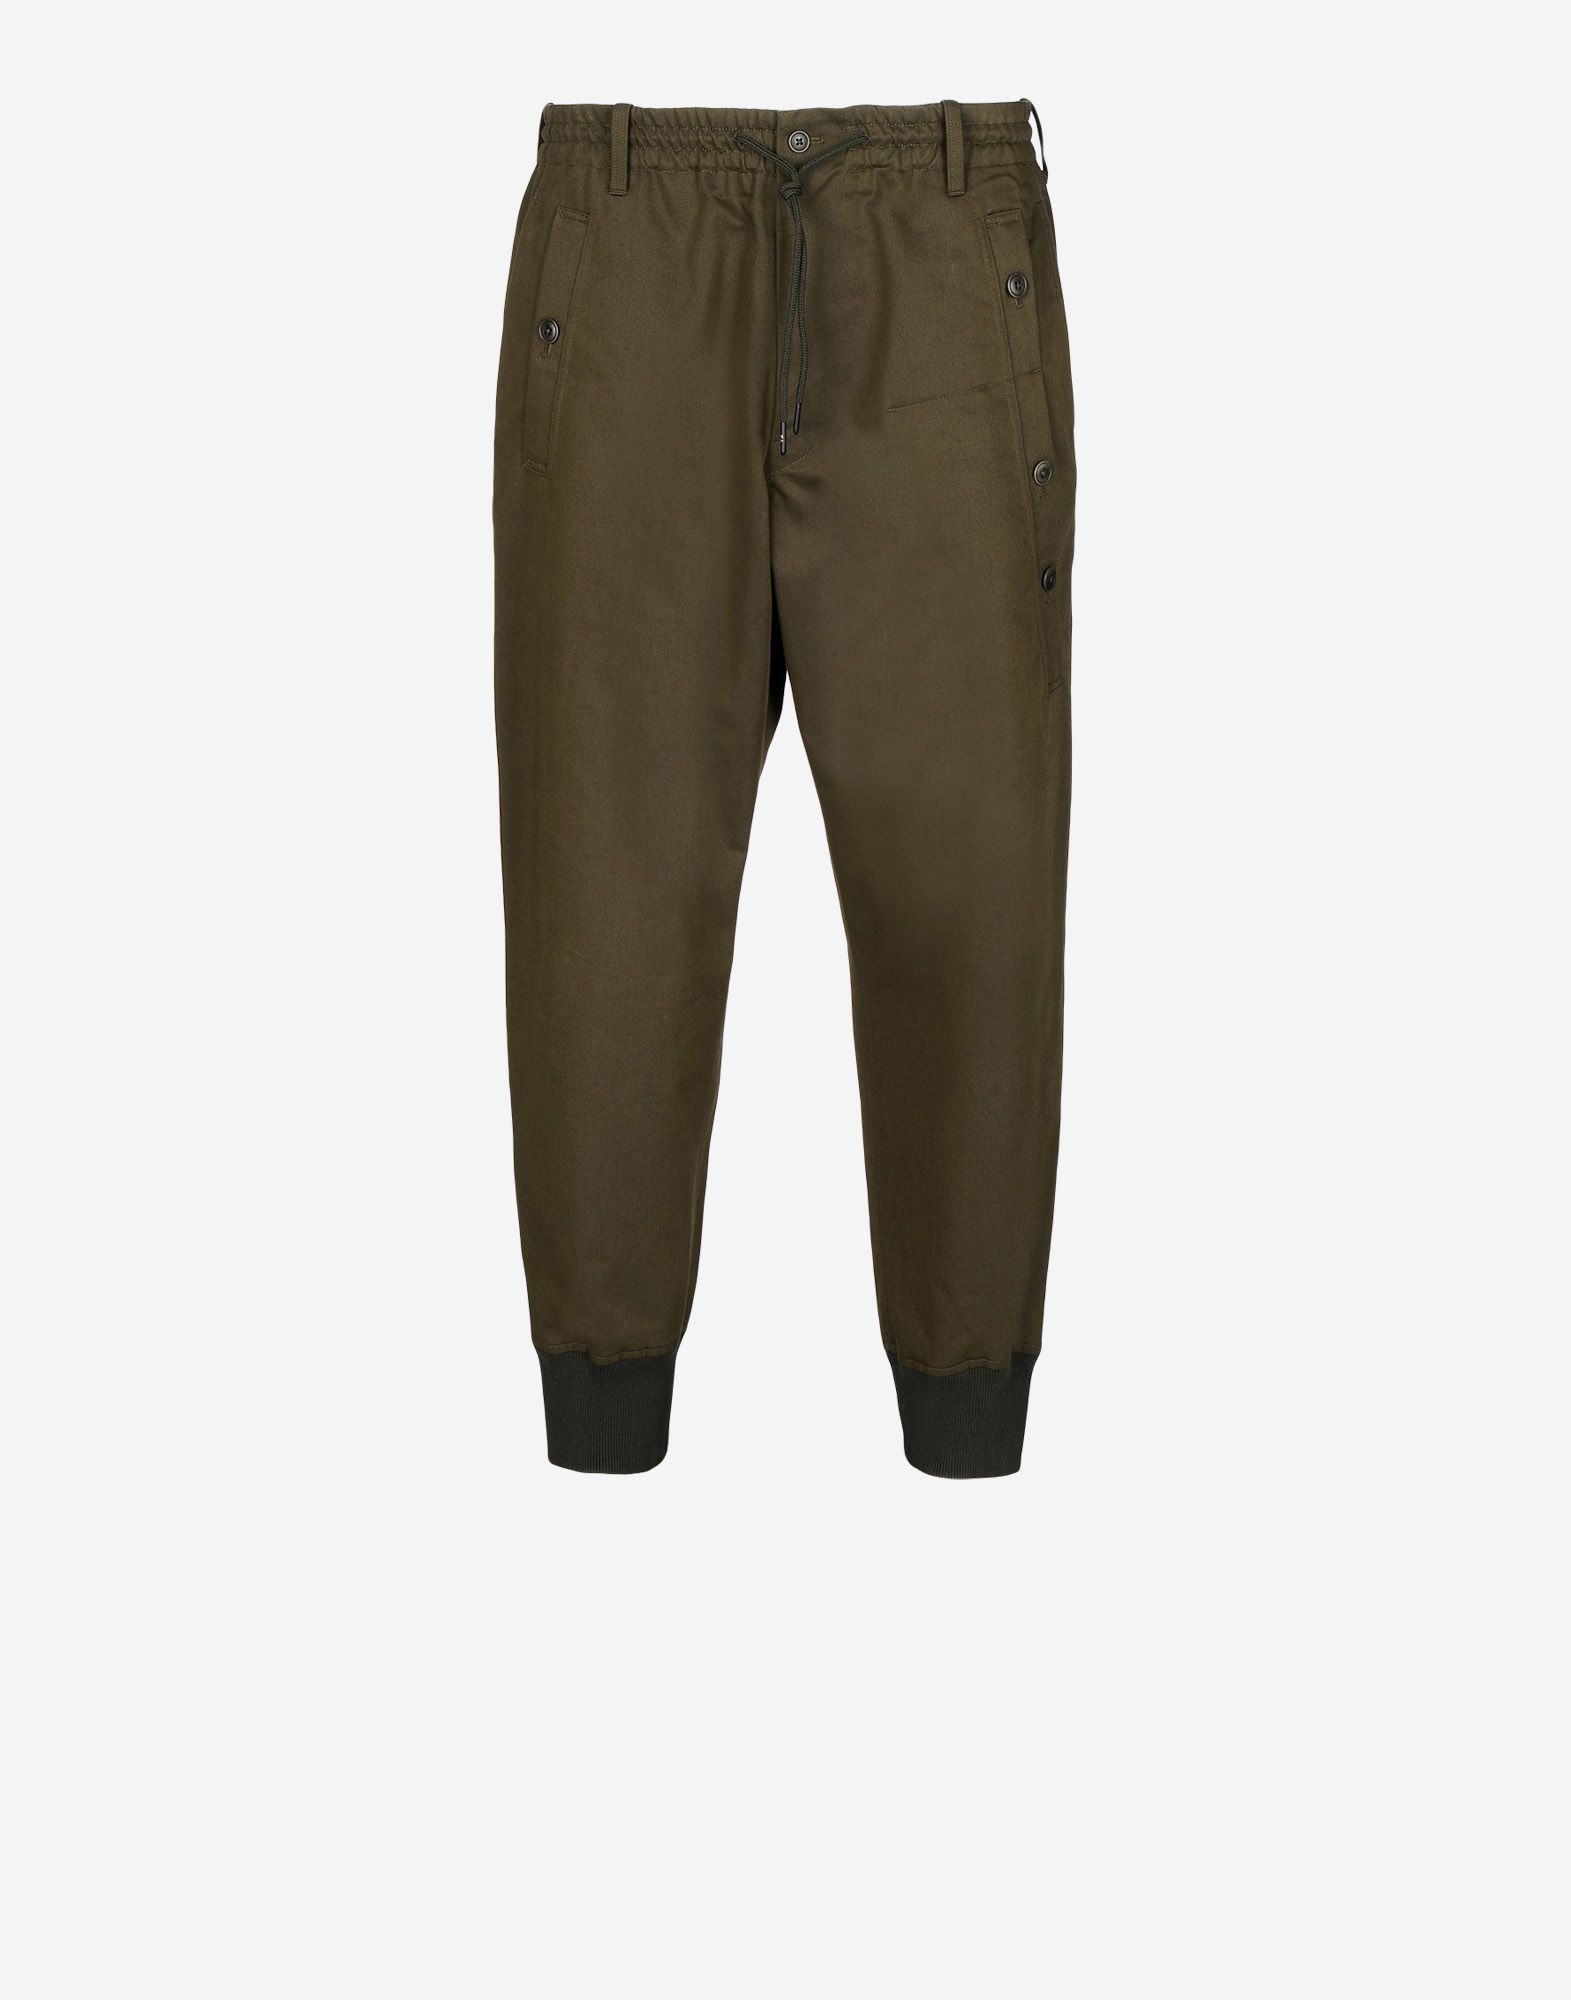 Y 3 JET PANT for Men | Adidas Y-3 Official Store